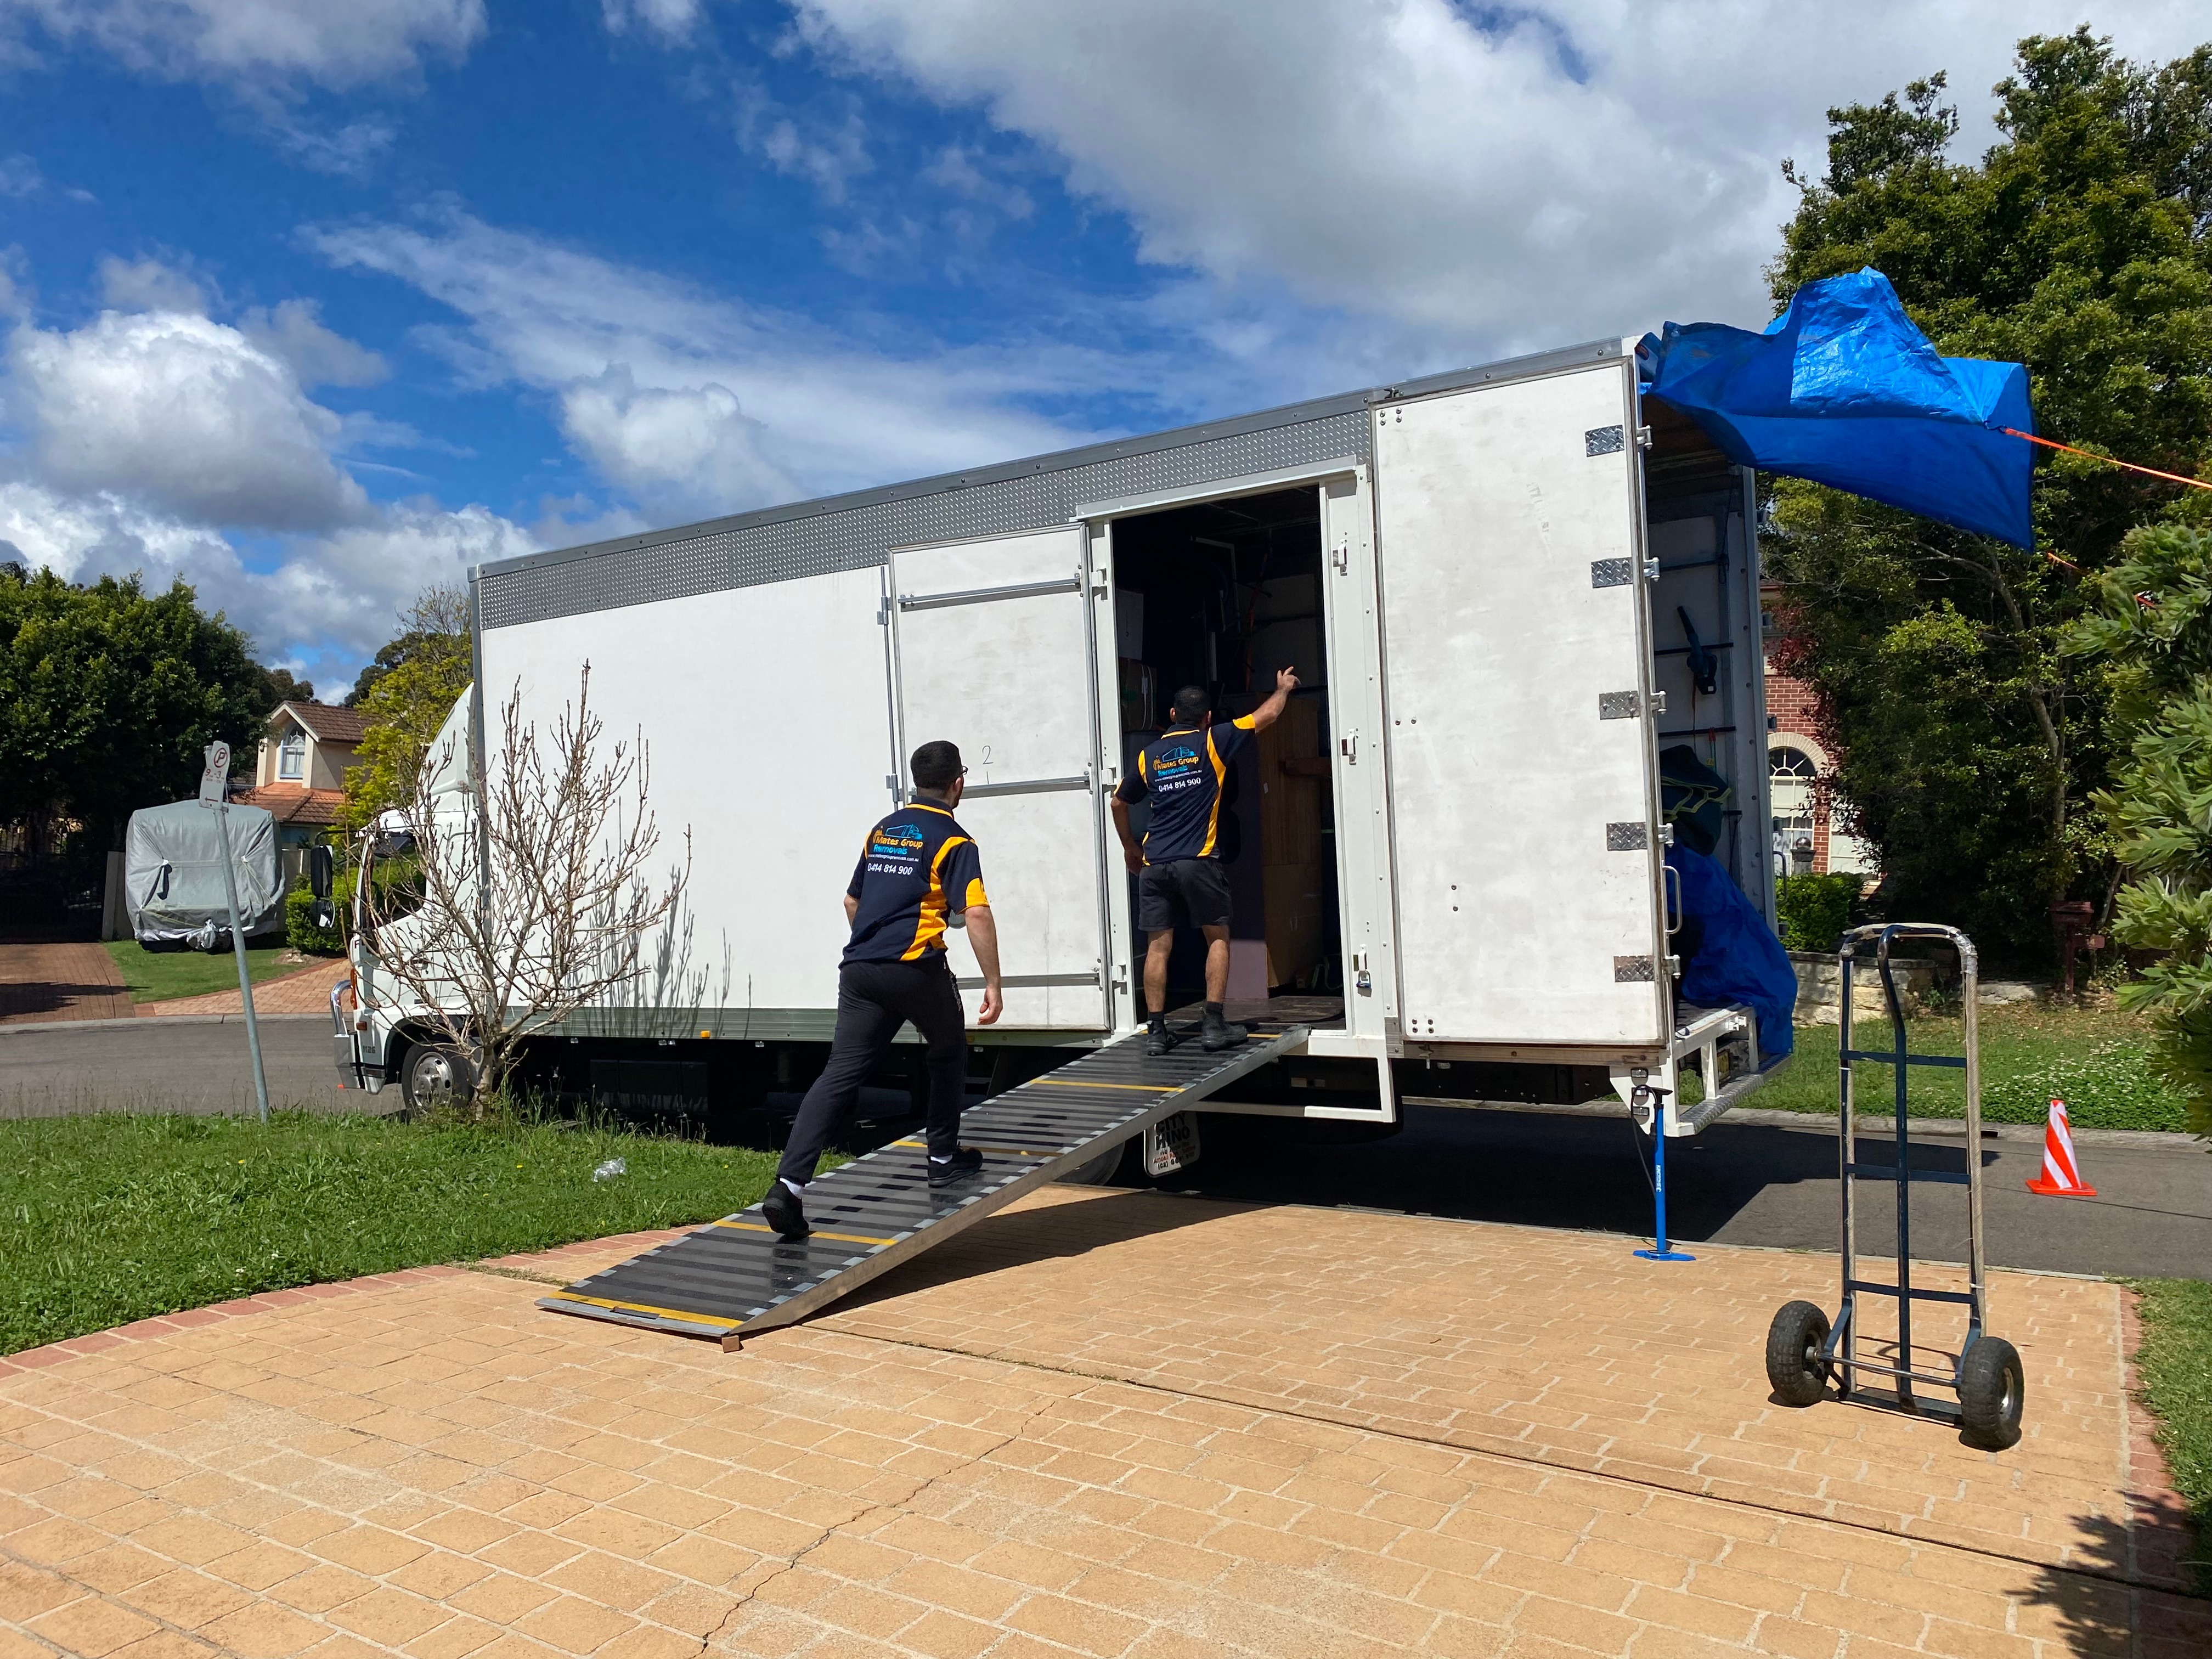 House movers Sydney